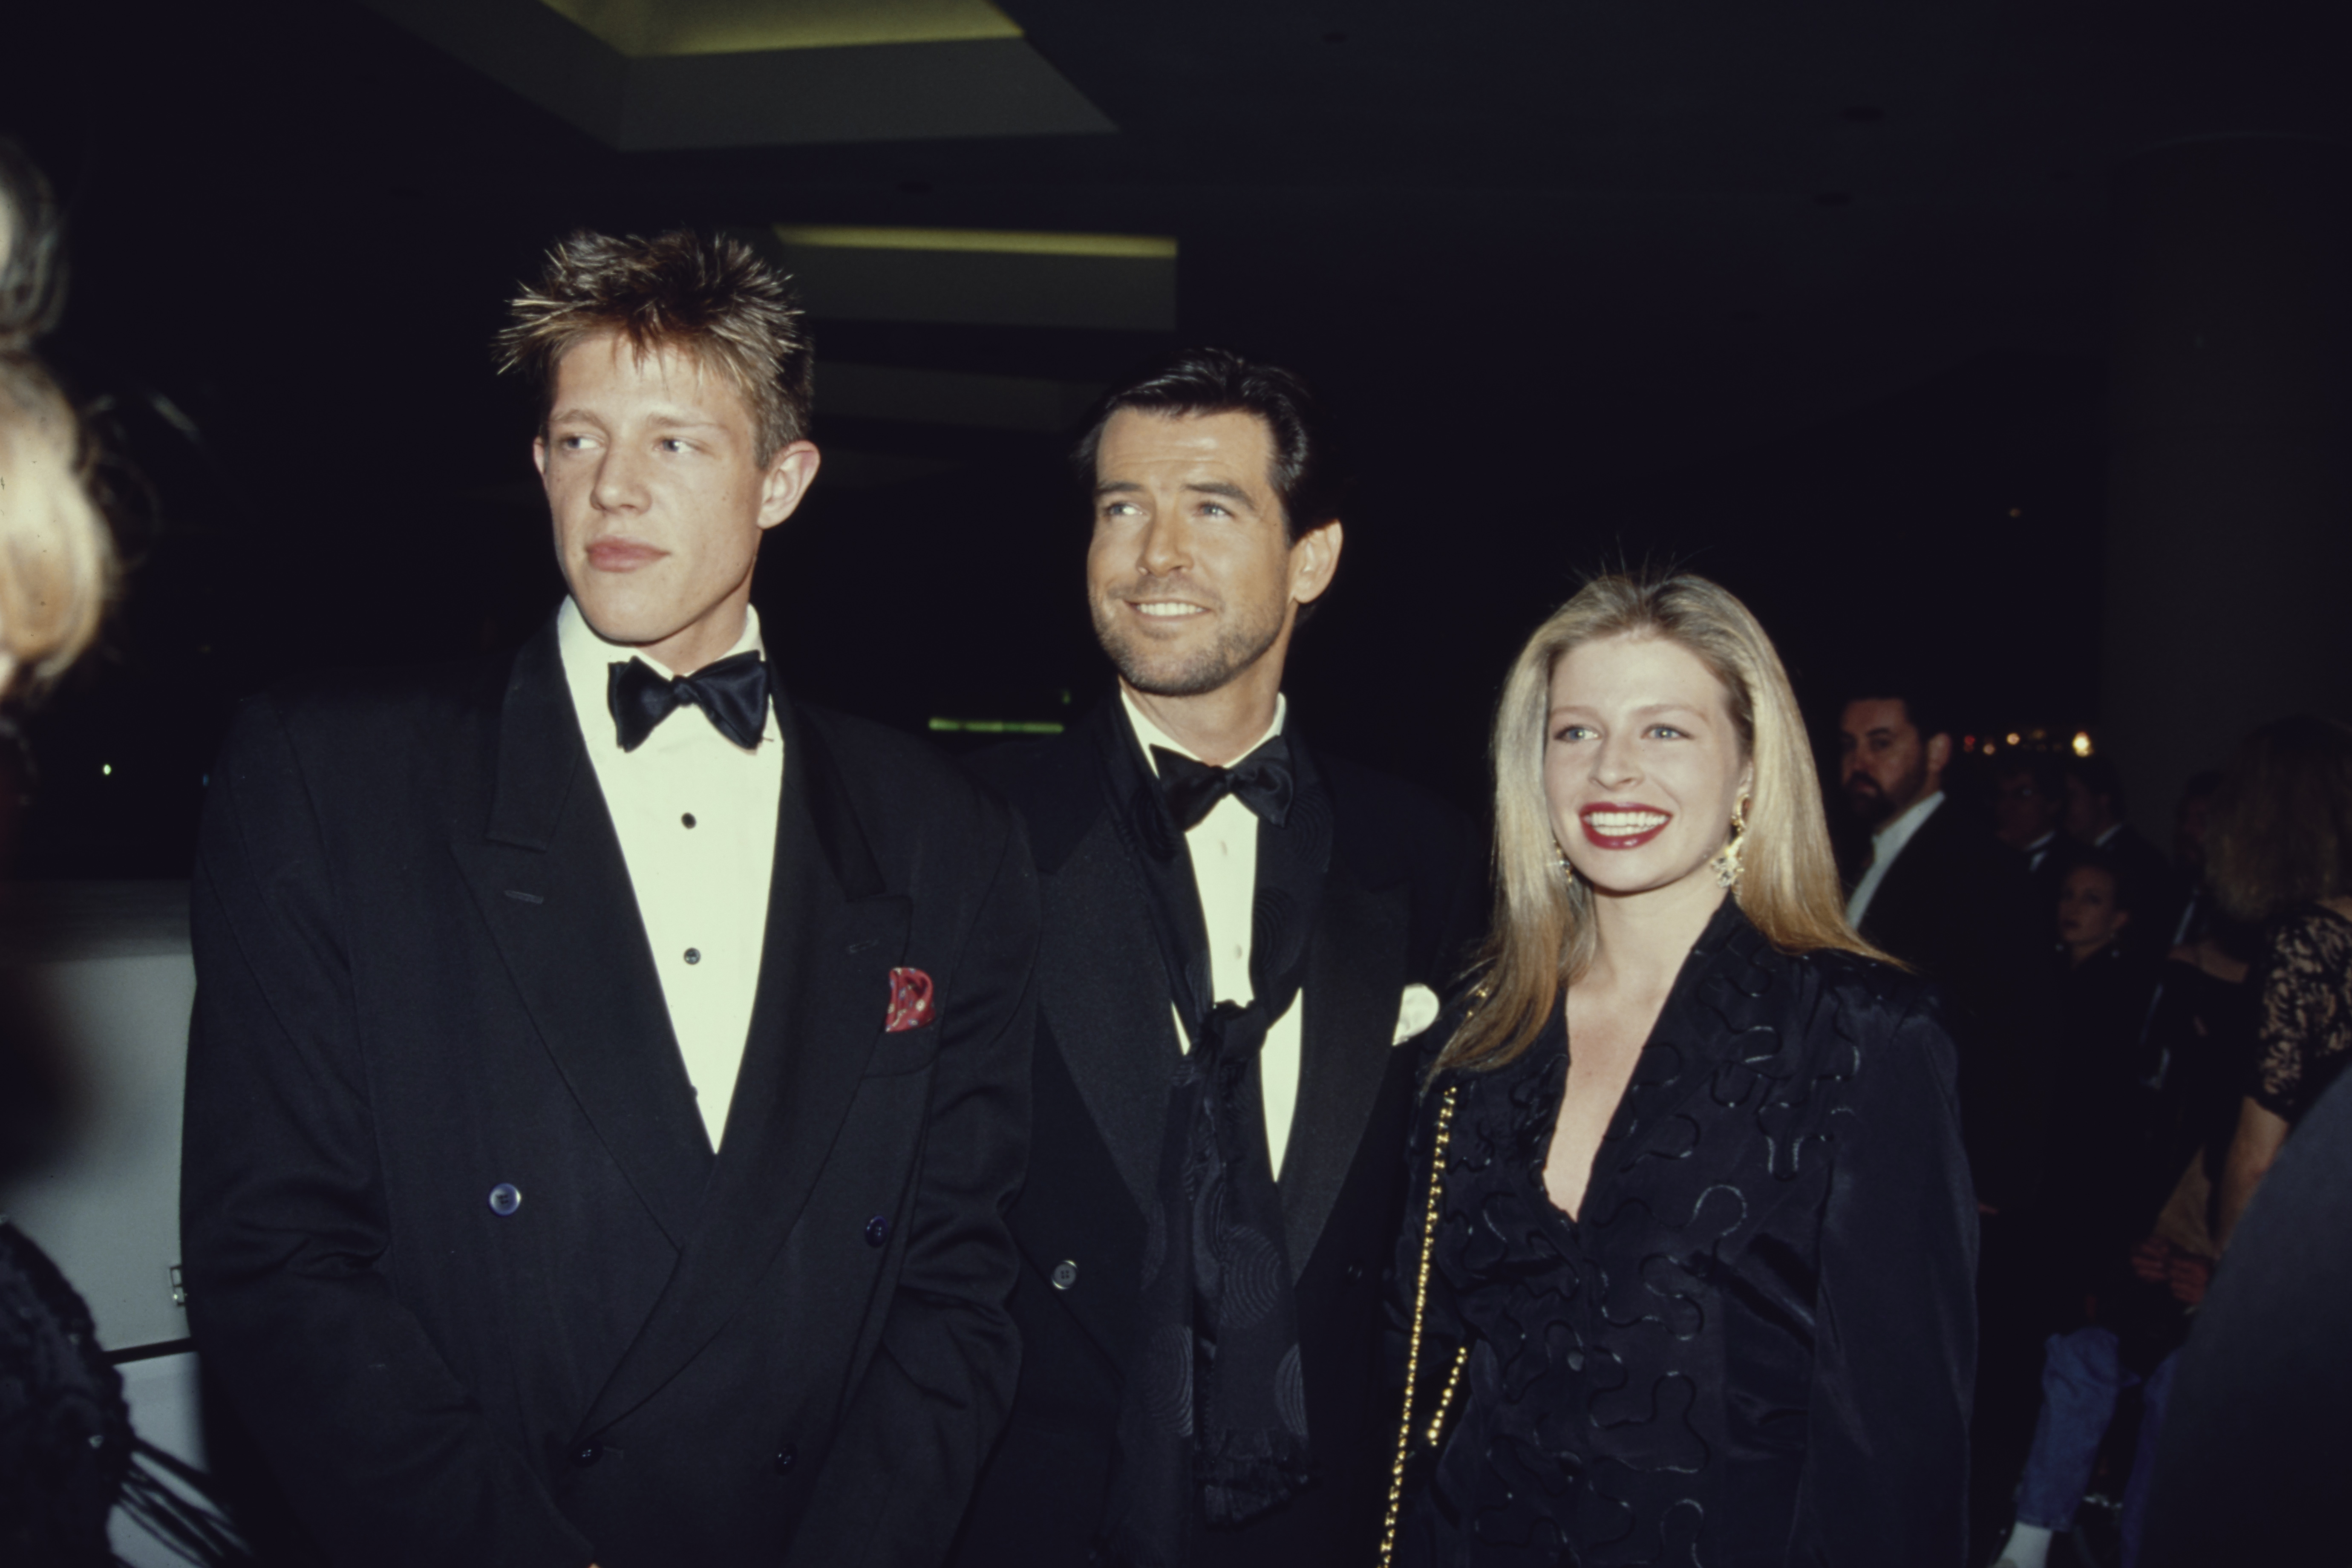 Christopher Brosnan, Pierce Brosnan, and Charlotte Brosnan at the 49th Annual Golden Globe Awards at the Beverly Hilton Hotel in Beverly Hills, California, on January 18, 1992. | Source: Getty Images